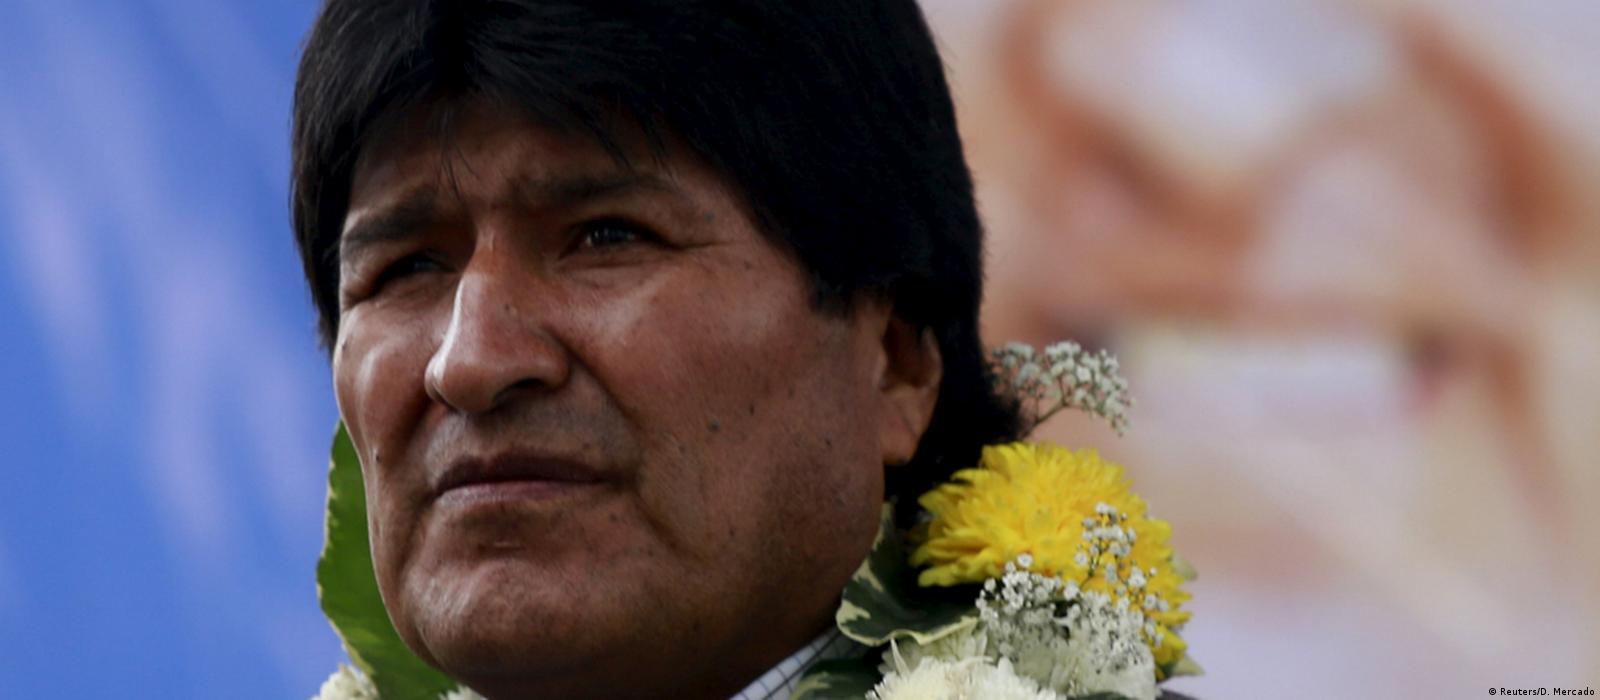 Evo Morales President of Bolivia combs his hair after playing soccer in  Zurich Thursday June 28 2007 Morales later on visited FIFA President  Joseph S Blatter to discuss a recent FIFA ban